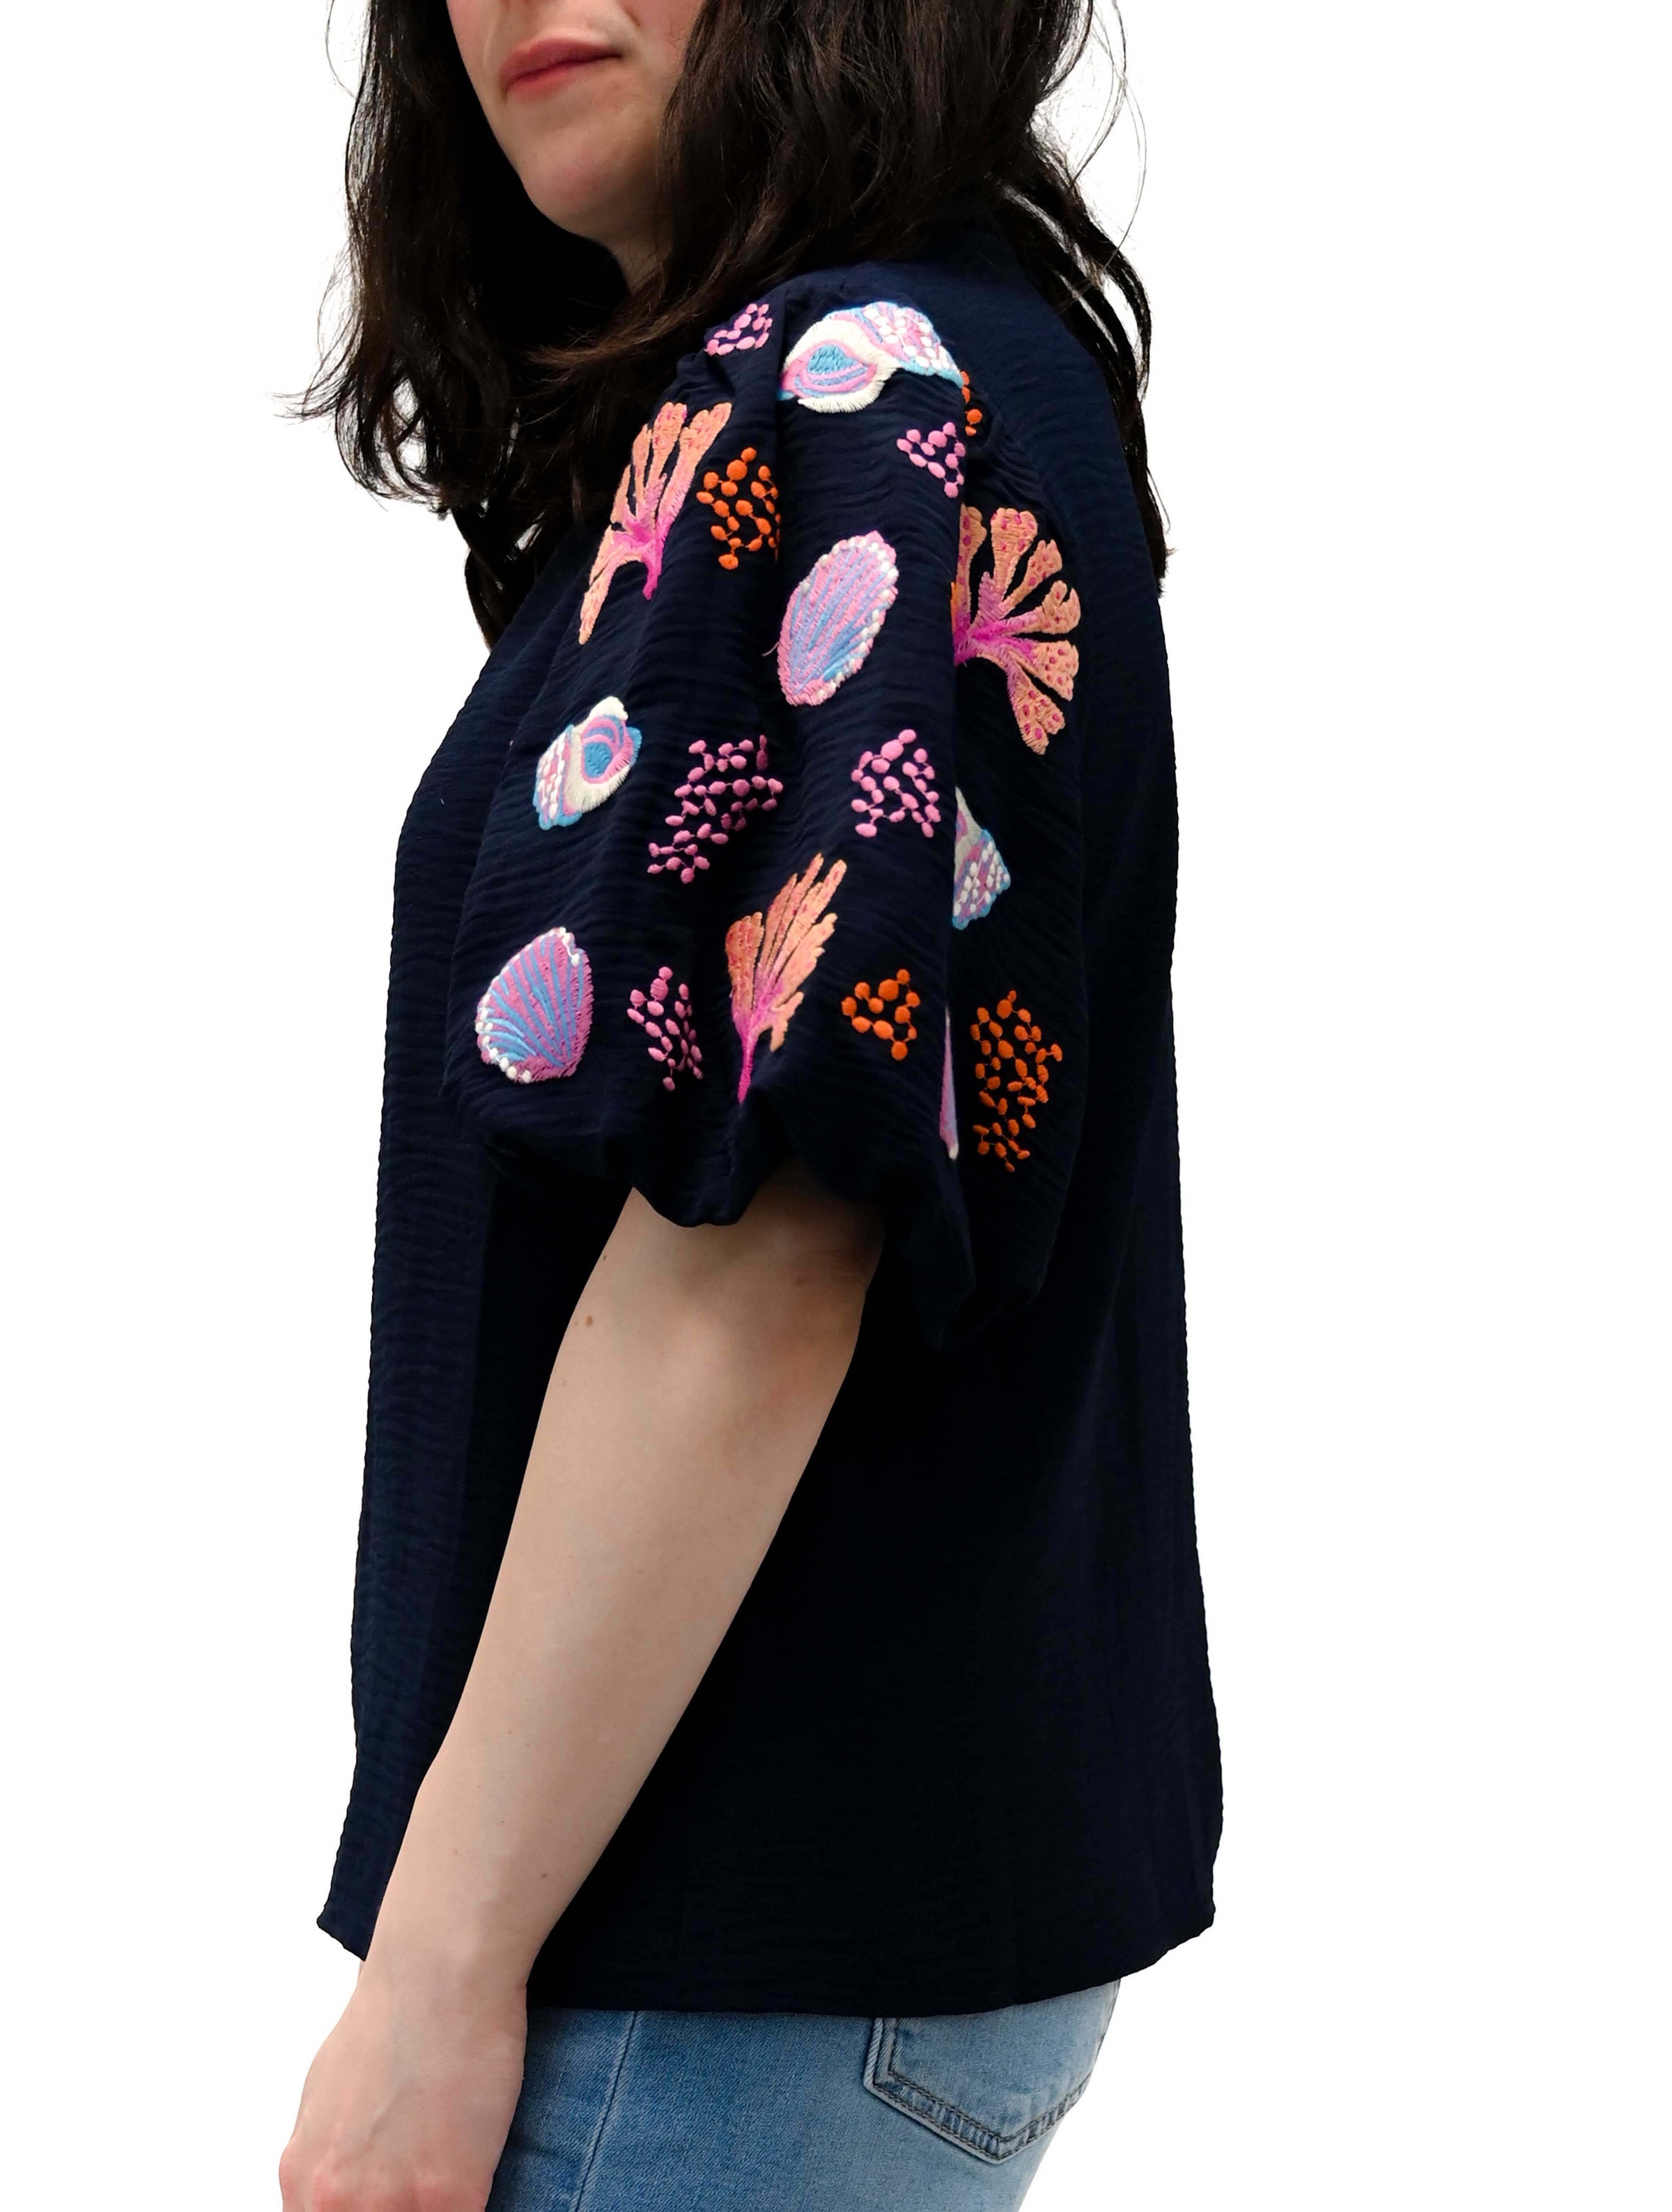 Embroidered Puff Sleeve Top in Navy